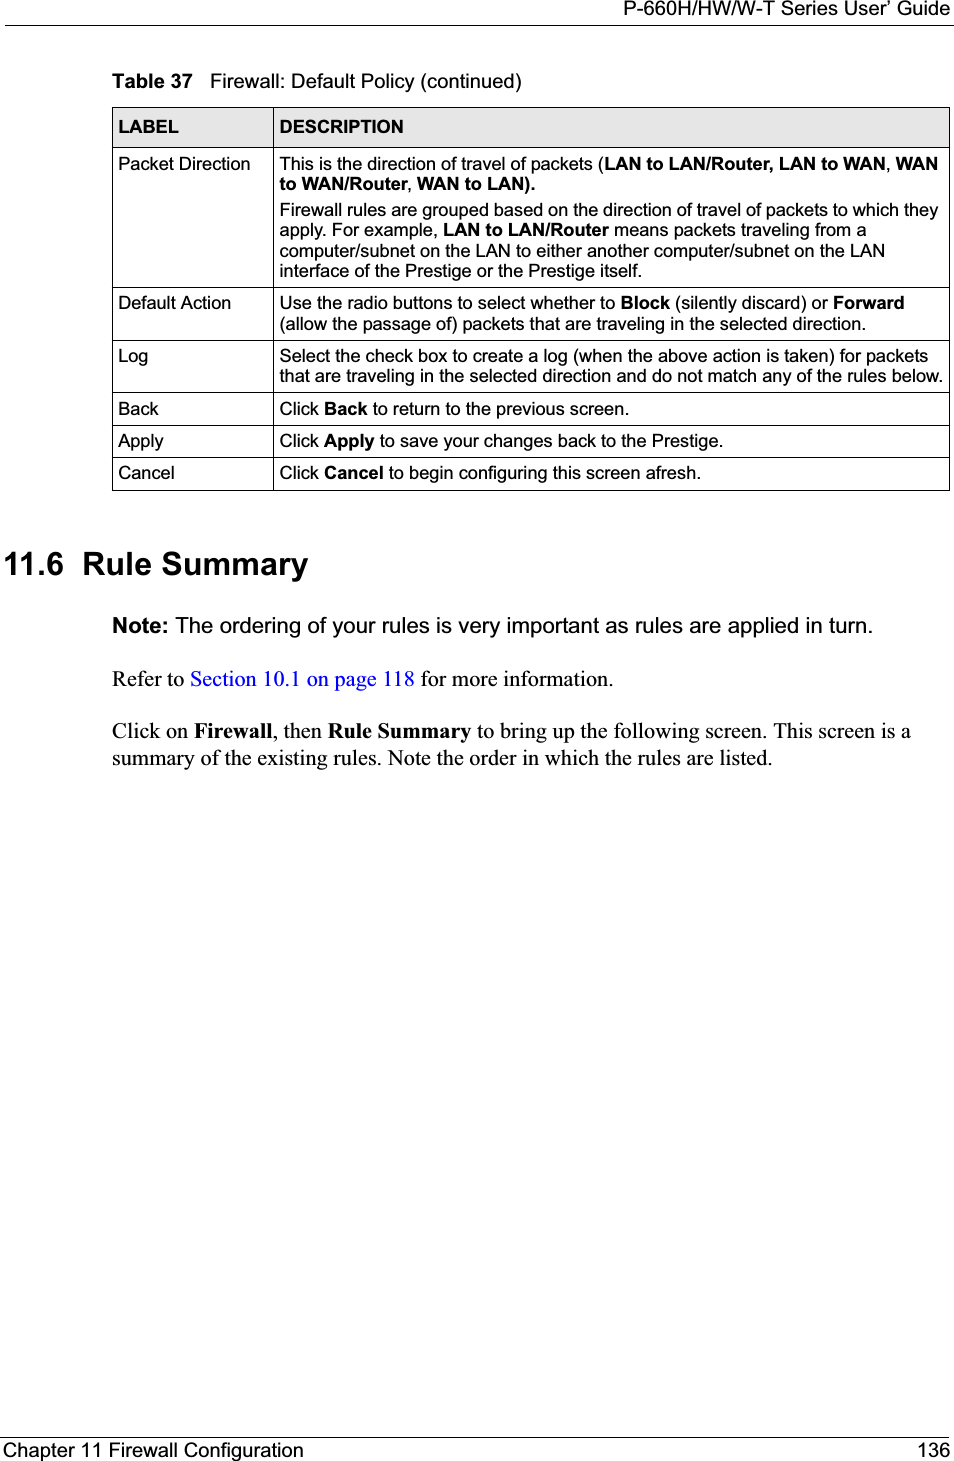 P-660H/HW/W-T Series User’ GuideChapter 11 Firewall Configuration 13611.6  Rule Summary  Note: The ordering of your rules is very important as rules are applied in turn.Refer to Section 10.1 on page 118 for more information. Click on Firewall, then Rule Summary to bring up the following screen. This screen is a summary of the existing rules. Note the order in which the rules are listed.Packet Direction This is the direction of travel of packets (LAN to LAN/Router, LAN to WAN,WAN to WAN/Router,WAN to LAN).Firewall rules are grouped based on the direction of travel of packets to which they apply. For example, LAN to LAN/Router means packets traveling from a computer/subnet on the LAN to either another computer/subnet on the LAN interface of the Prestige or the Prestige itself. Default Action Use the radio buttons to select whether to Block (silently discard) or Forward(allow the passage of) packets that are traveling in the selected direction.Log Select the check box to create a log (when the above action is taken) for packets that are traveling in the selected direction and do not match any of the rules below.Back Click Back to return to the previous screen. Apply Click Apply to save your changes back to the Prestige.Cancel Click Cancel to begin configuring this screen afresh.Table 37   Firewall: Default Policy (continued)LABEL DESCRIPTION